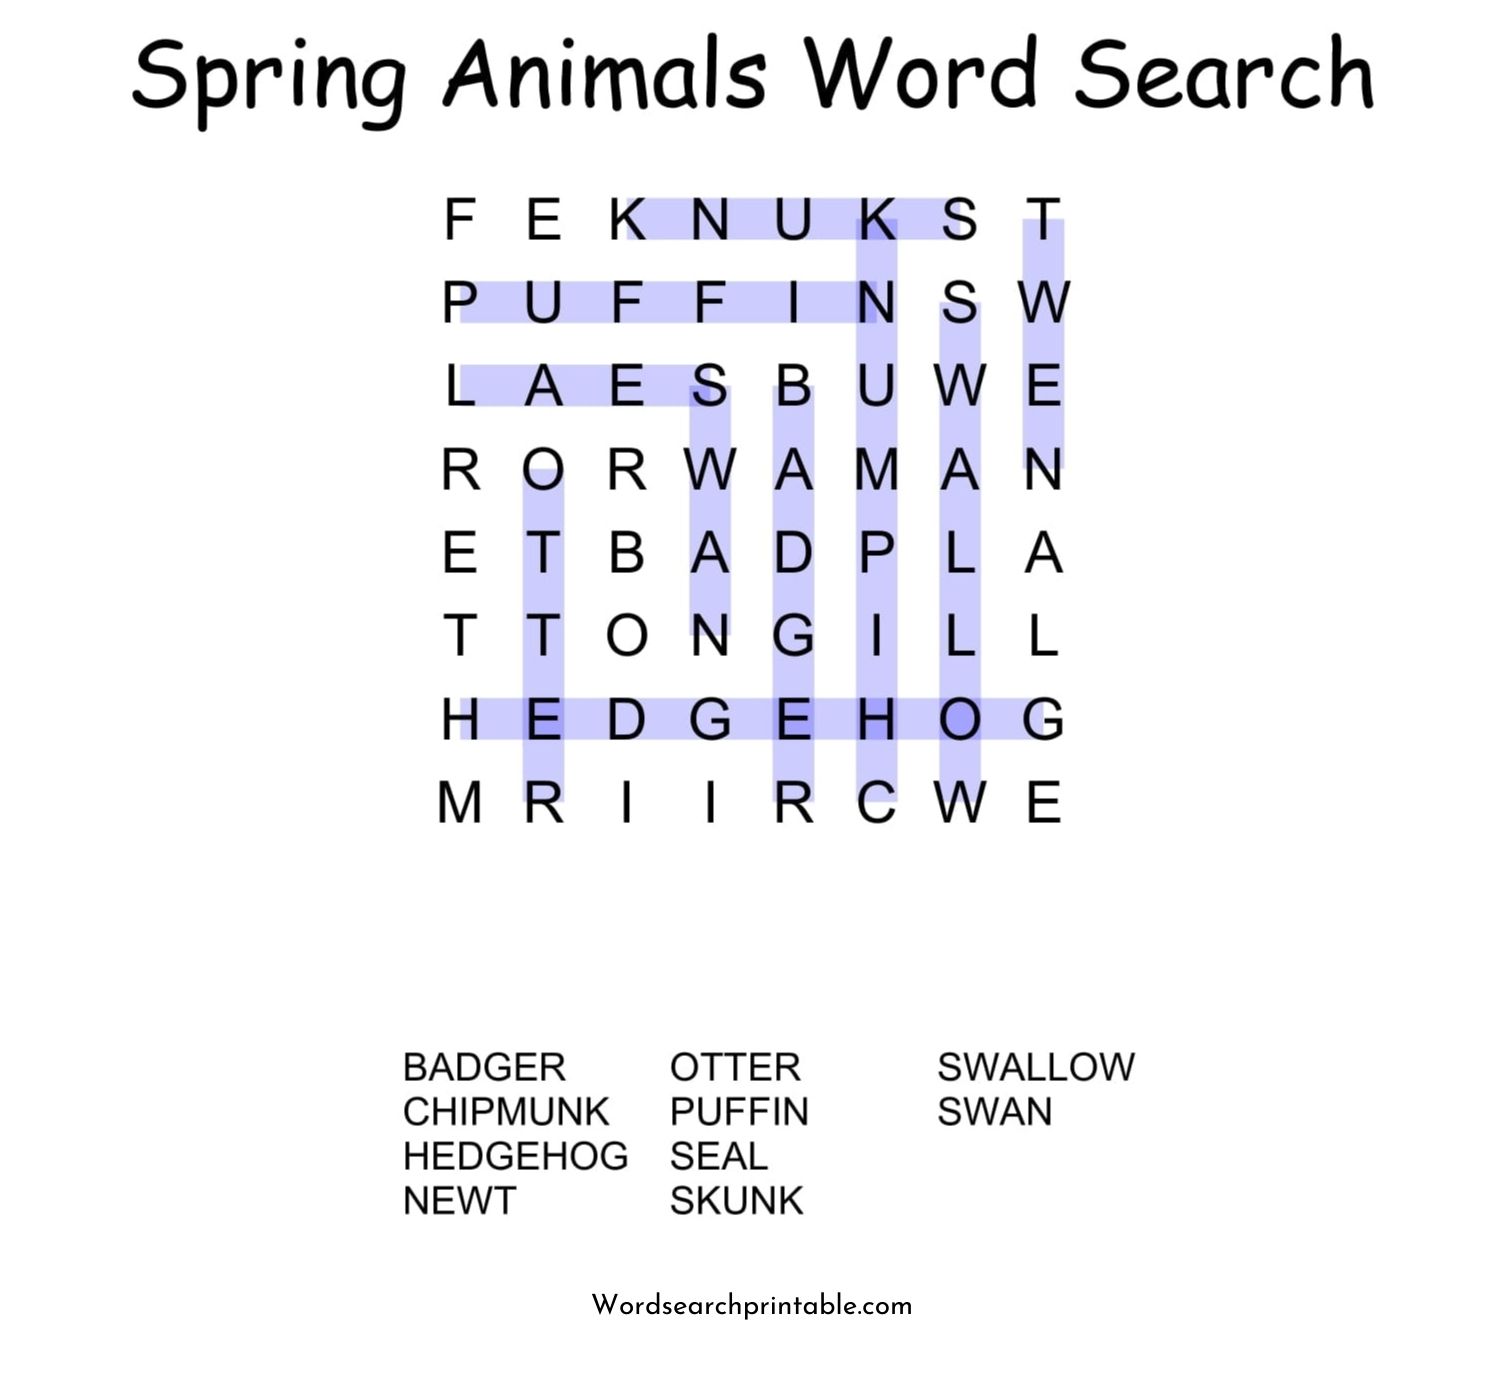 spring animals word search puzzle solution